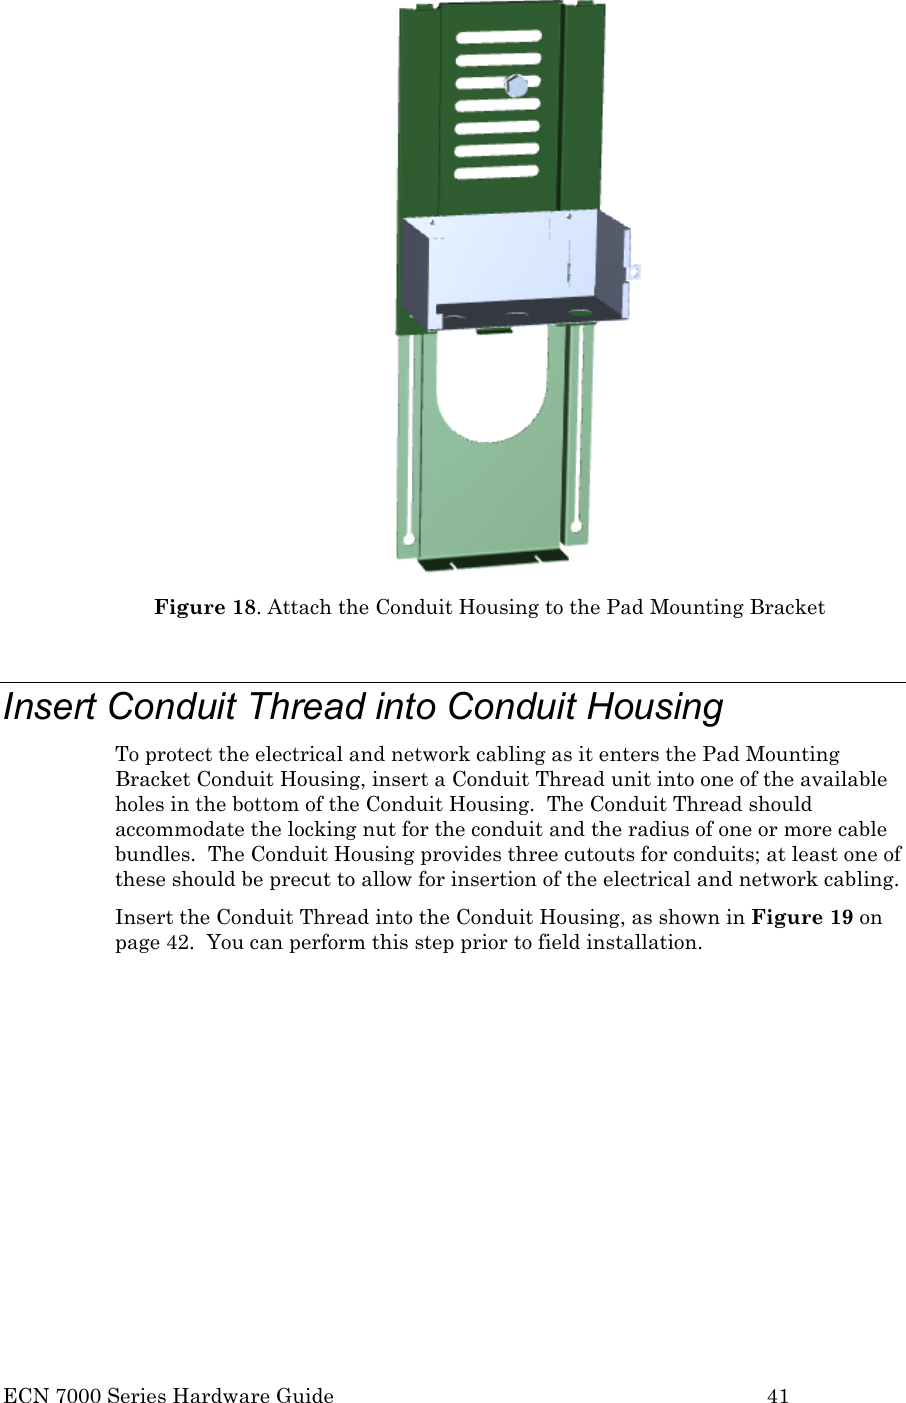  ECN 7000 Series Hardware Guide        41  Figure 18. Attach the Conduit Housing to the Pad Mounting Bracket  Insert Conduit Thread into Conduit Housing To protect the electrical and network cabling as it enters the Pad Mounting Bracket Conduit Housing, insert a Conduit Thread unit into one of the available holes in the bottom of the Conduit Housing.  The Conduit Thread should accommodate the locking nut for the conduit and the radius of one or more cable bundles.  The Conduit Housing provides three cutouts for conduits; at least one of these should be precut to allow for insertion of the electrical and network cabling.   Insert the Conduit Thread into the Conduit Housing, as shown in Figure 19 on page 42.  You can perform this step prior to field installation.   